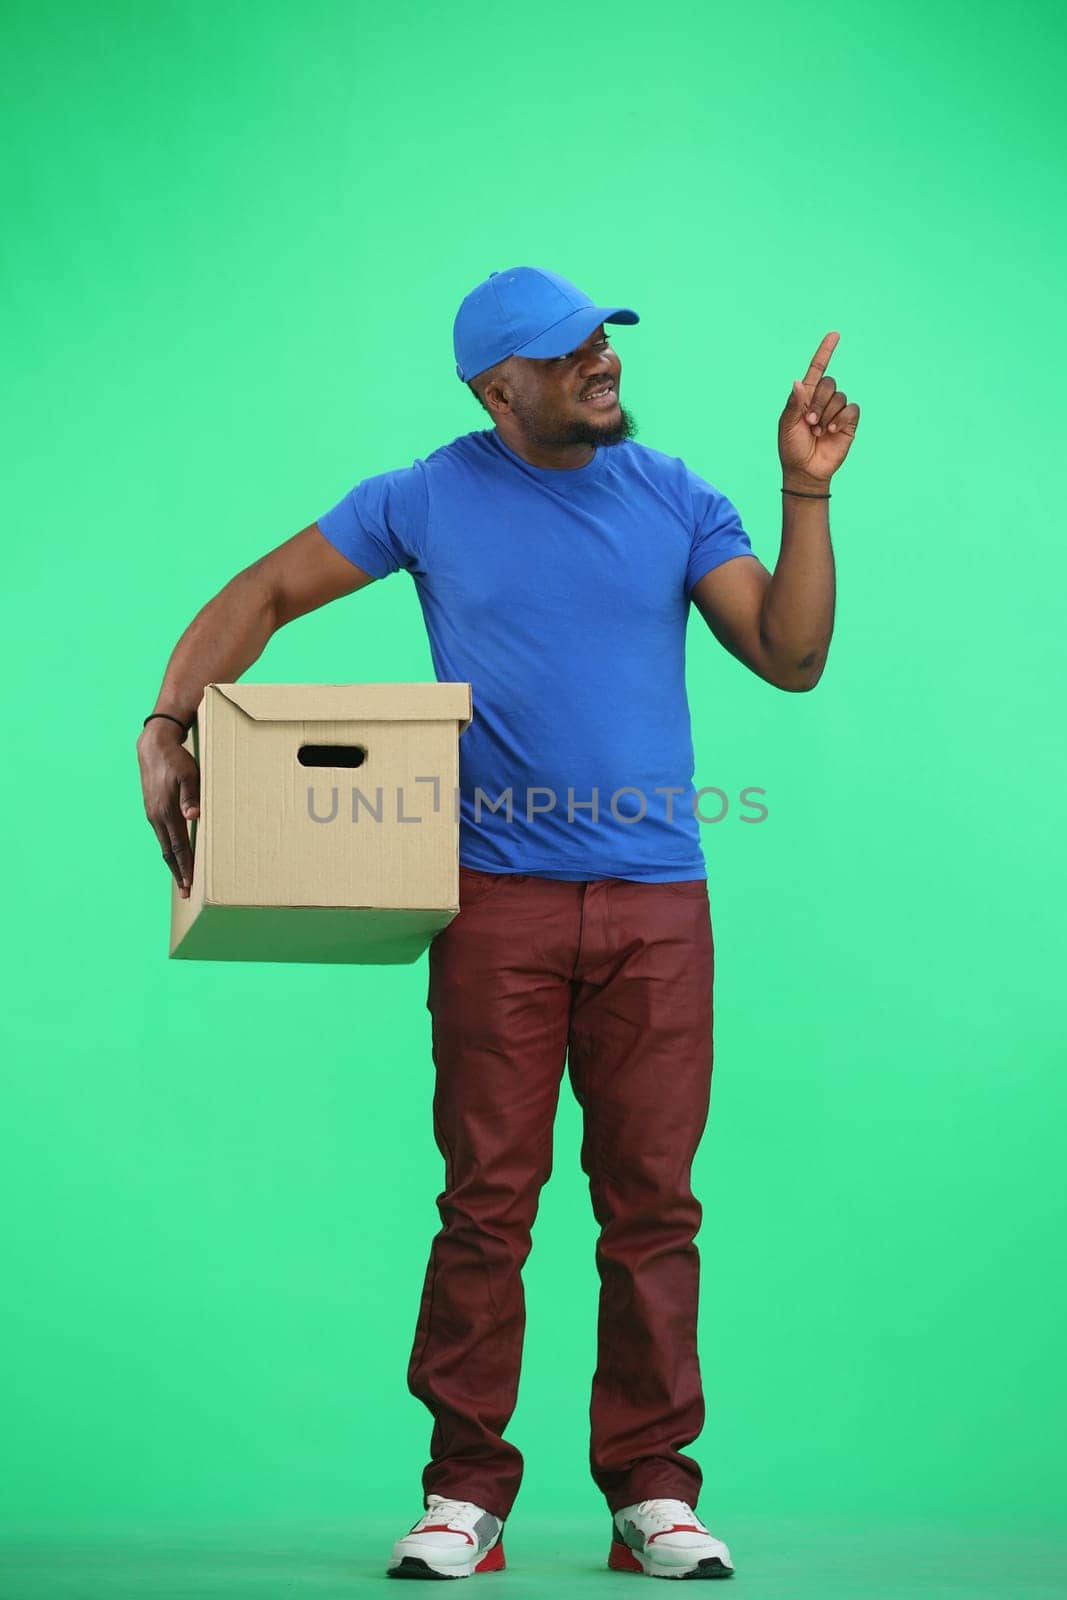 The deliveryman, in full height, on a green background, with a box, points to the side.